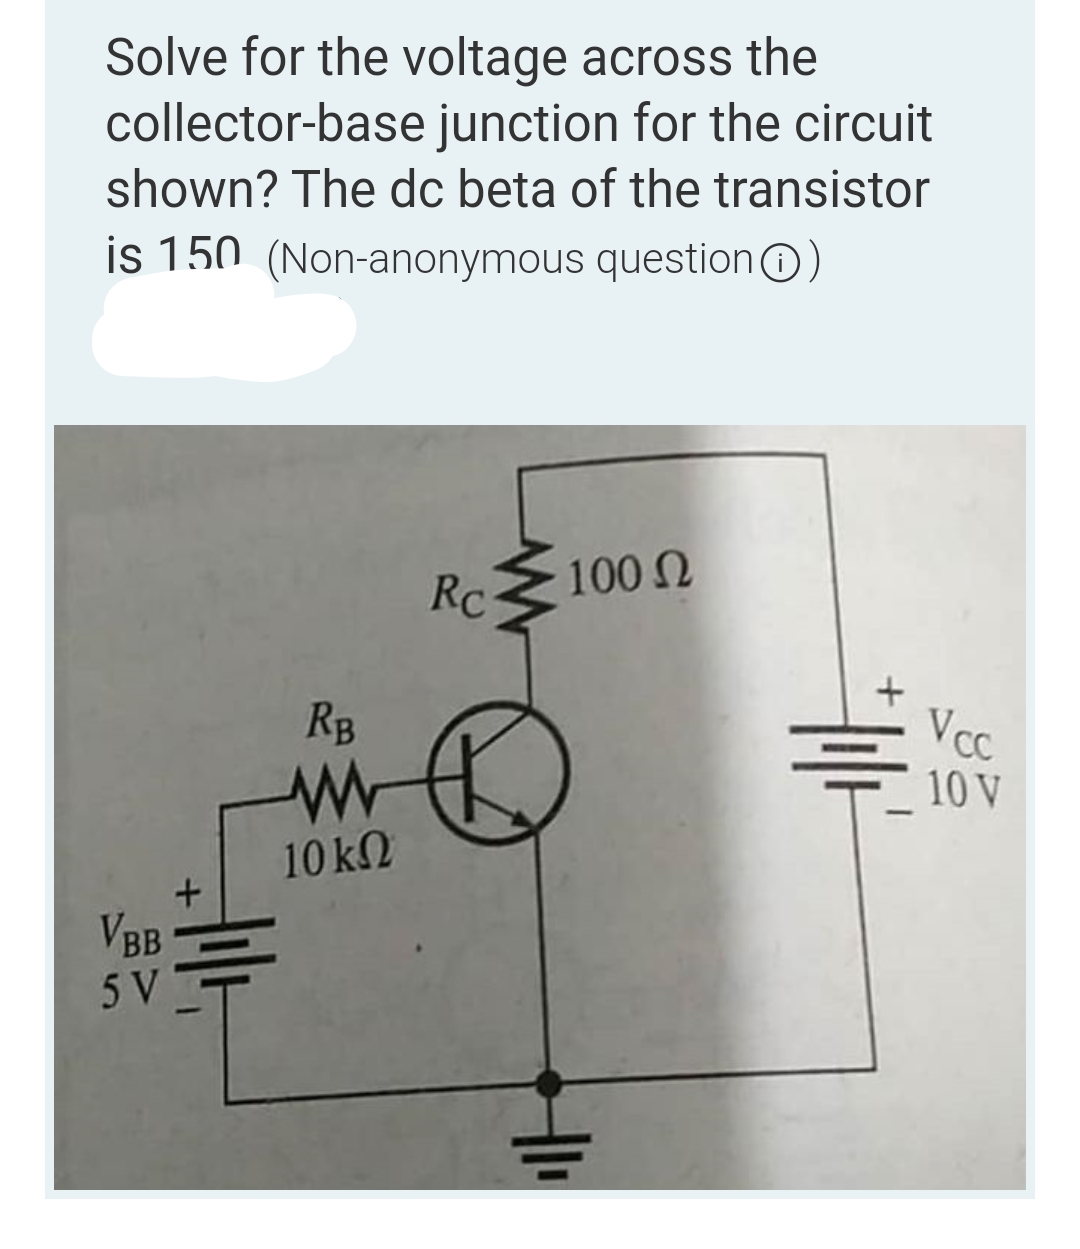 Solve for the voltage across the
collector-base junction for the circuit
shown? The dc beta of the transistor
is 150 (Non-anonymous question )
Rc
100 Ω
VBB
5 V
+
RB
www
10 ΚΩ
A
+1₁
+1/+
Vcc
10 V